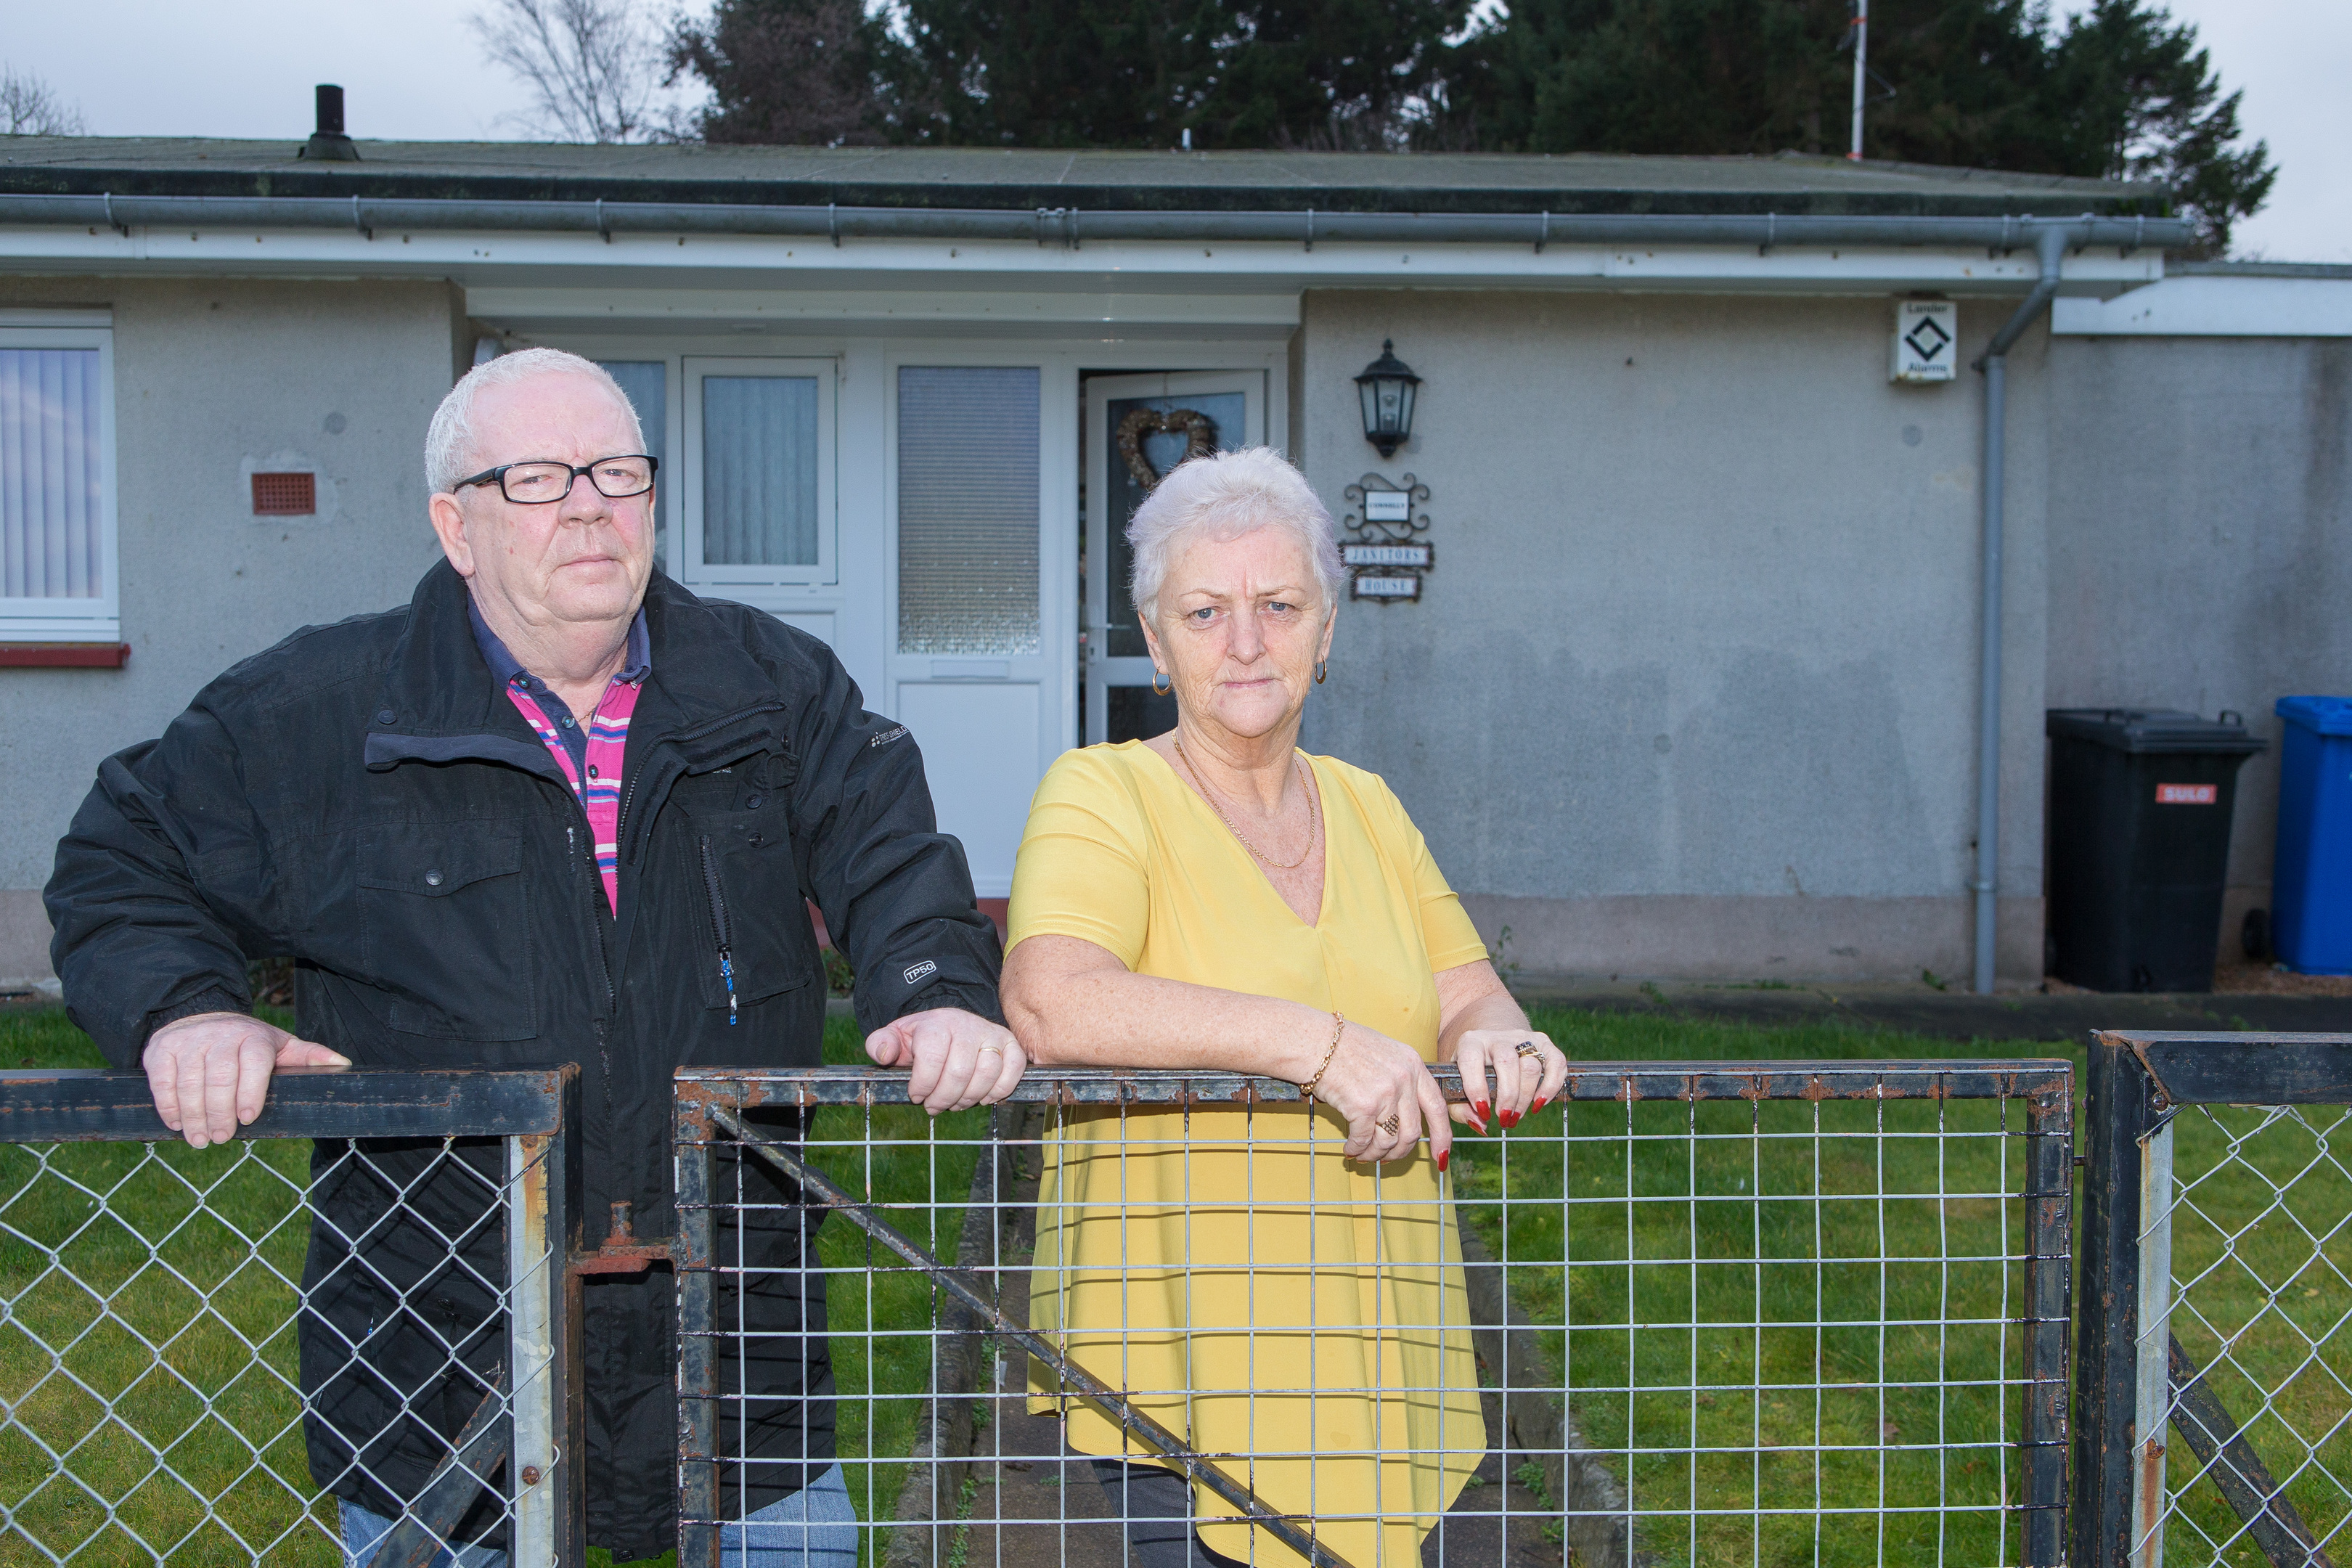 Joe and Margaret Connolly at home within the grounds of Torbain Primary School in Kirkcaldy.